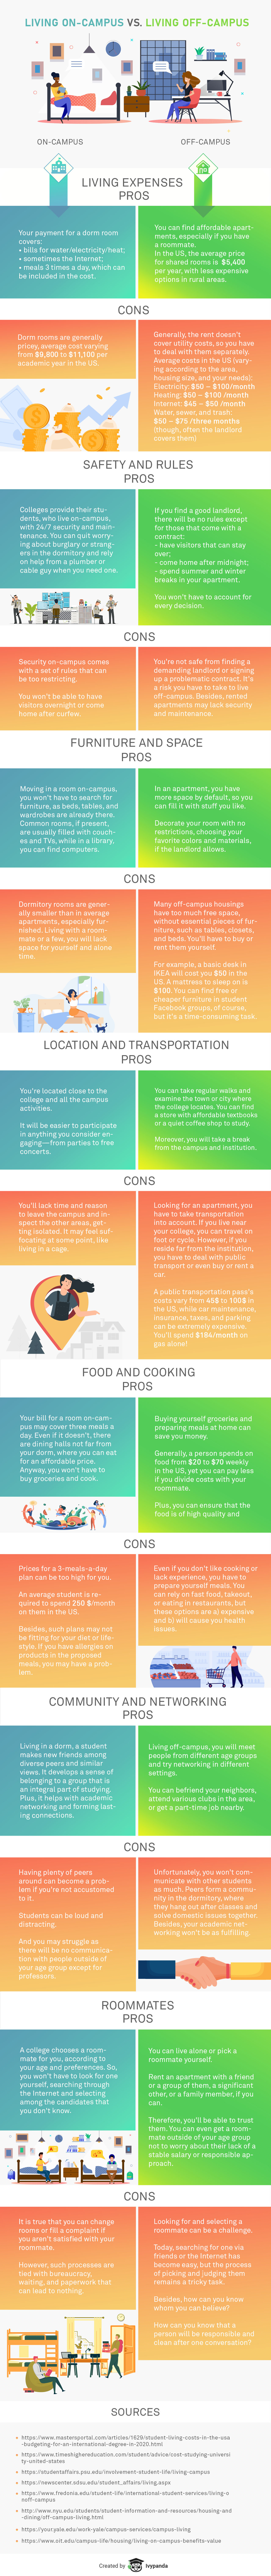 In this infographic, our experts prepared an illustrative comparison of the housing options. See whether living on-campus is more affordable and suitable for you than residing off-campus or not. Find out what challenges await you either way.